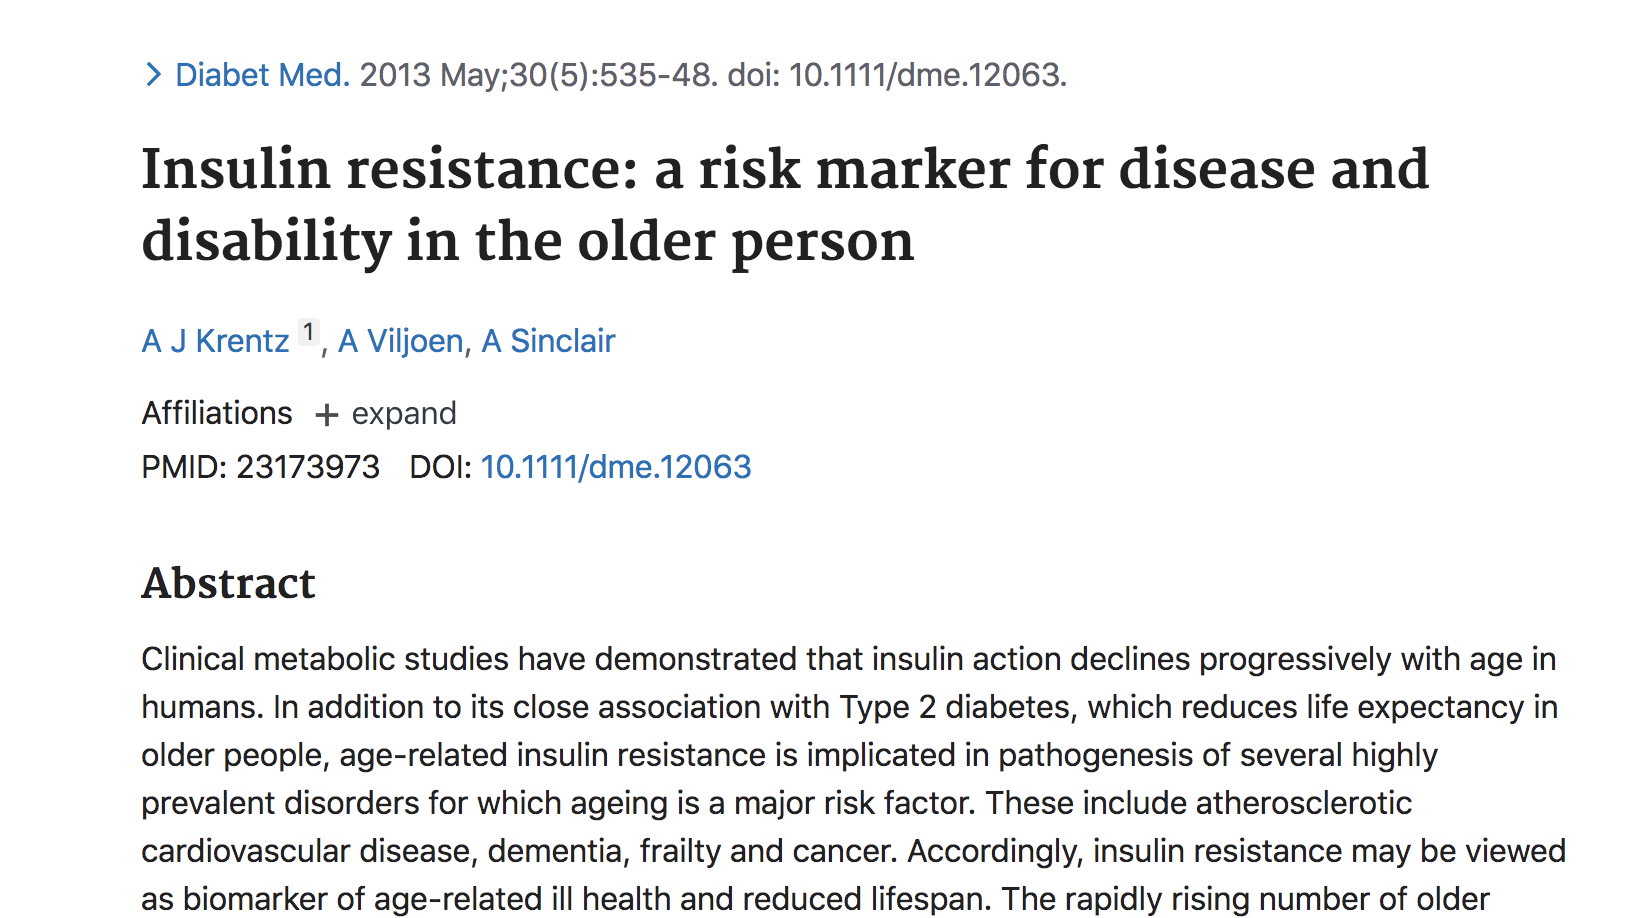 image of Insulin resistance: a risk marker for disease and disability in the older person.